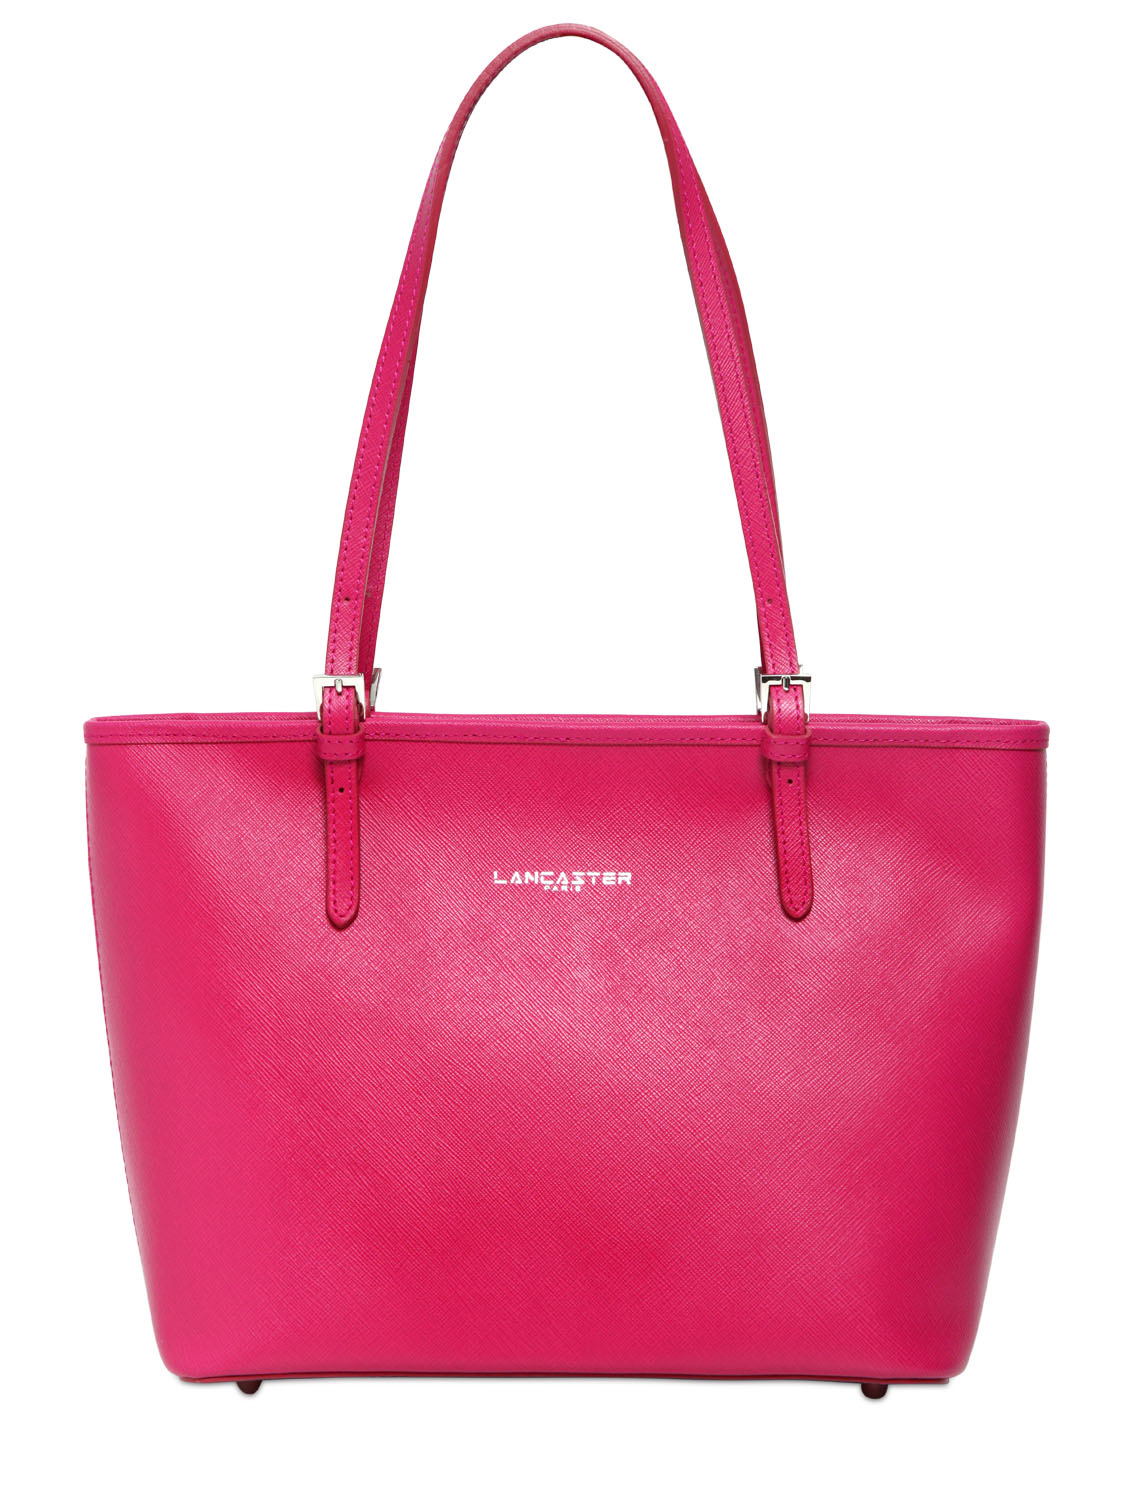 Lancaster Adele Saffiano Leather Tote Bag in Pink | Lyst